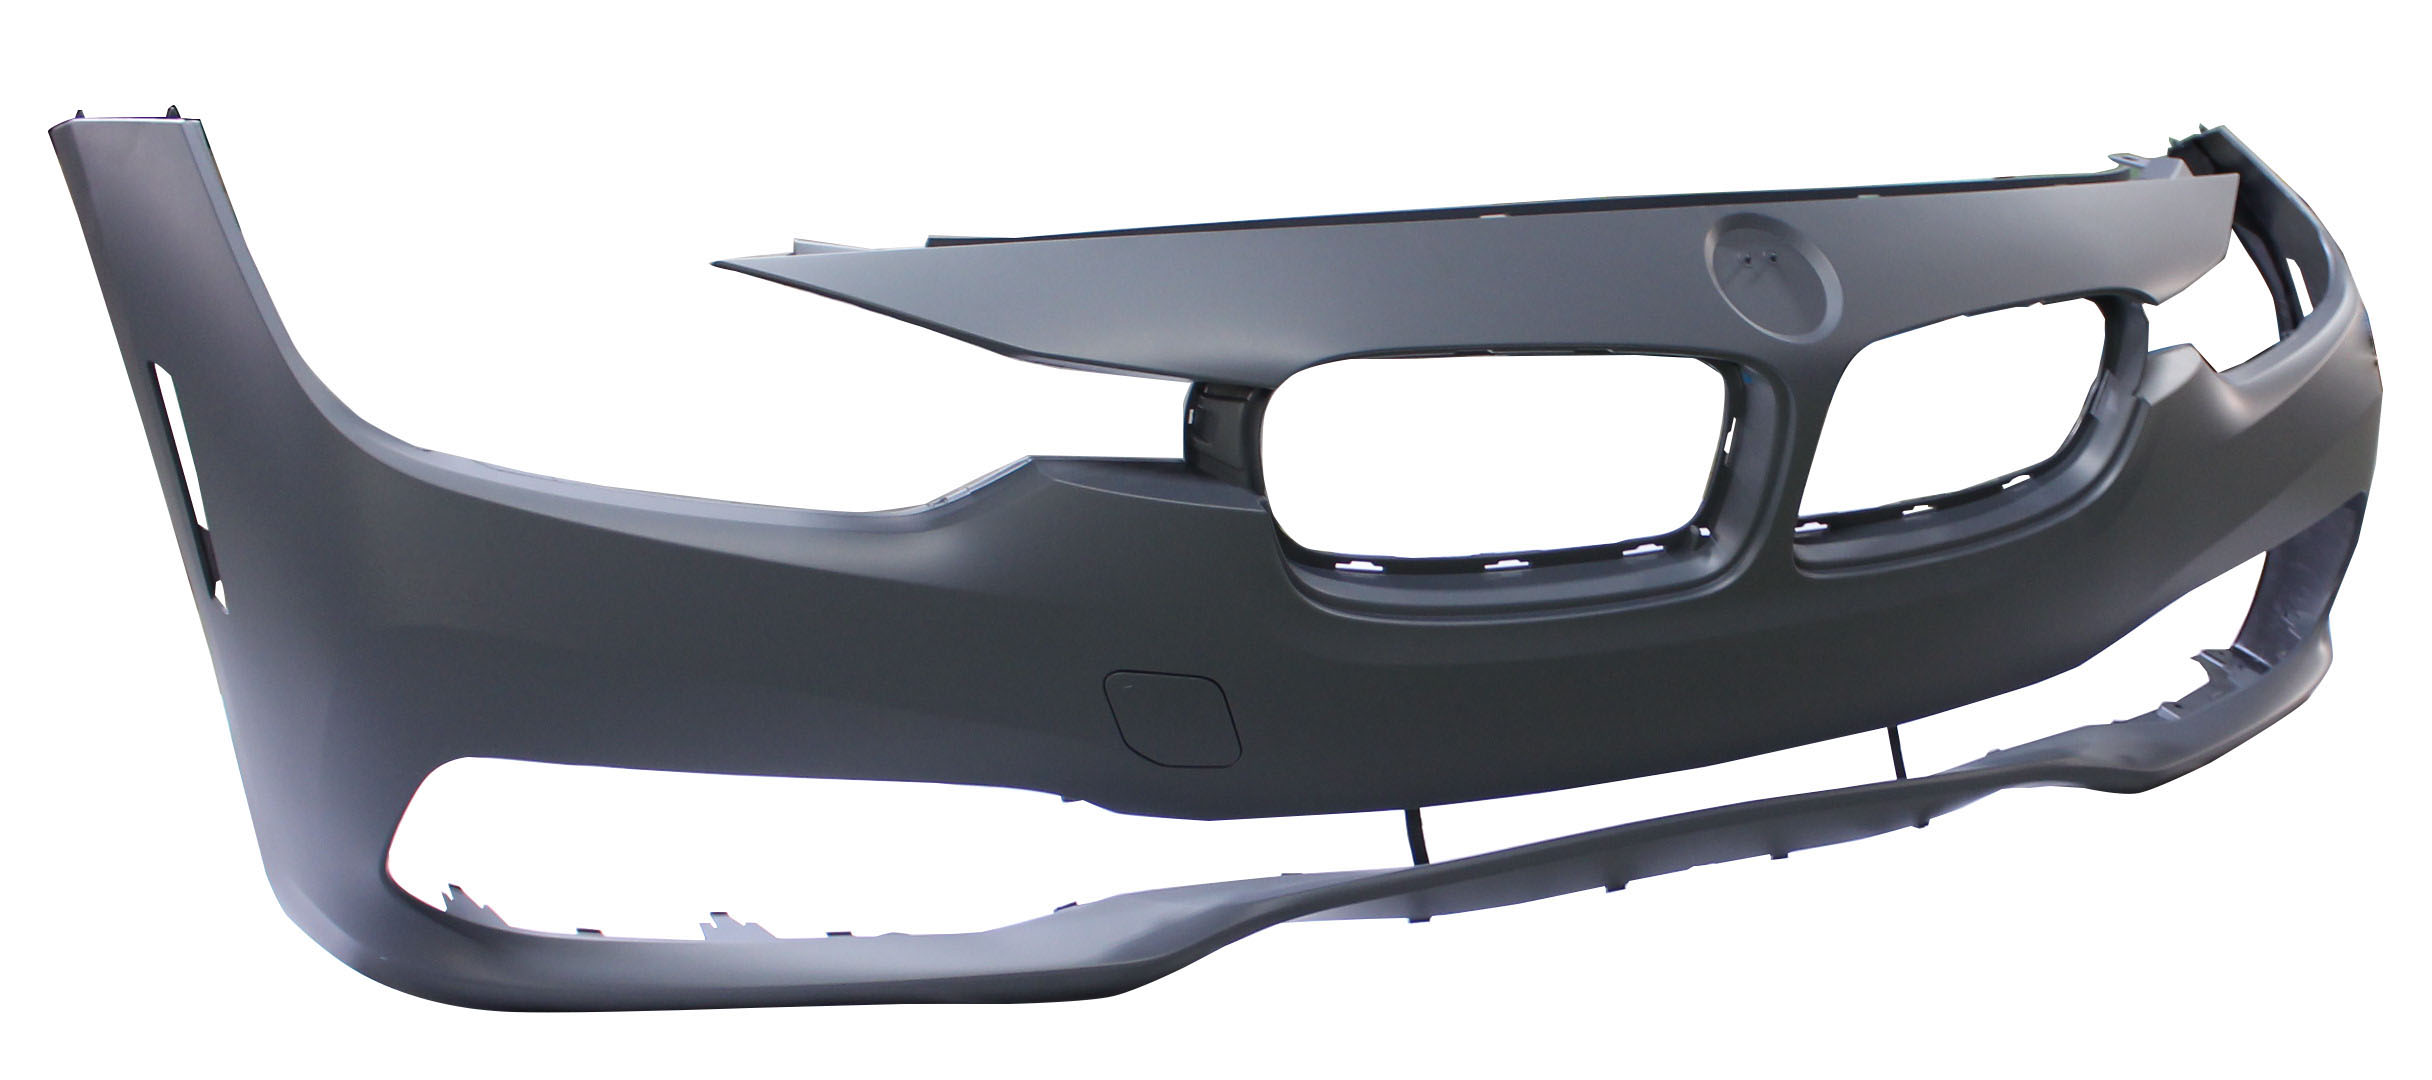 Aftermarket BUMPER COVERS for BMW - 330I XDRIVE, 330i xDrive,17-18,Front bumper cover